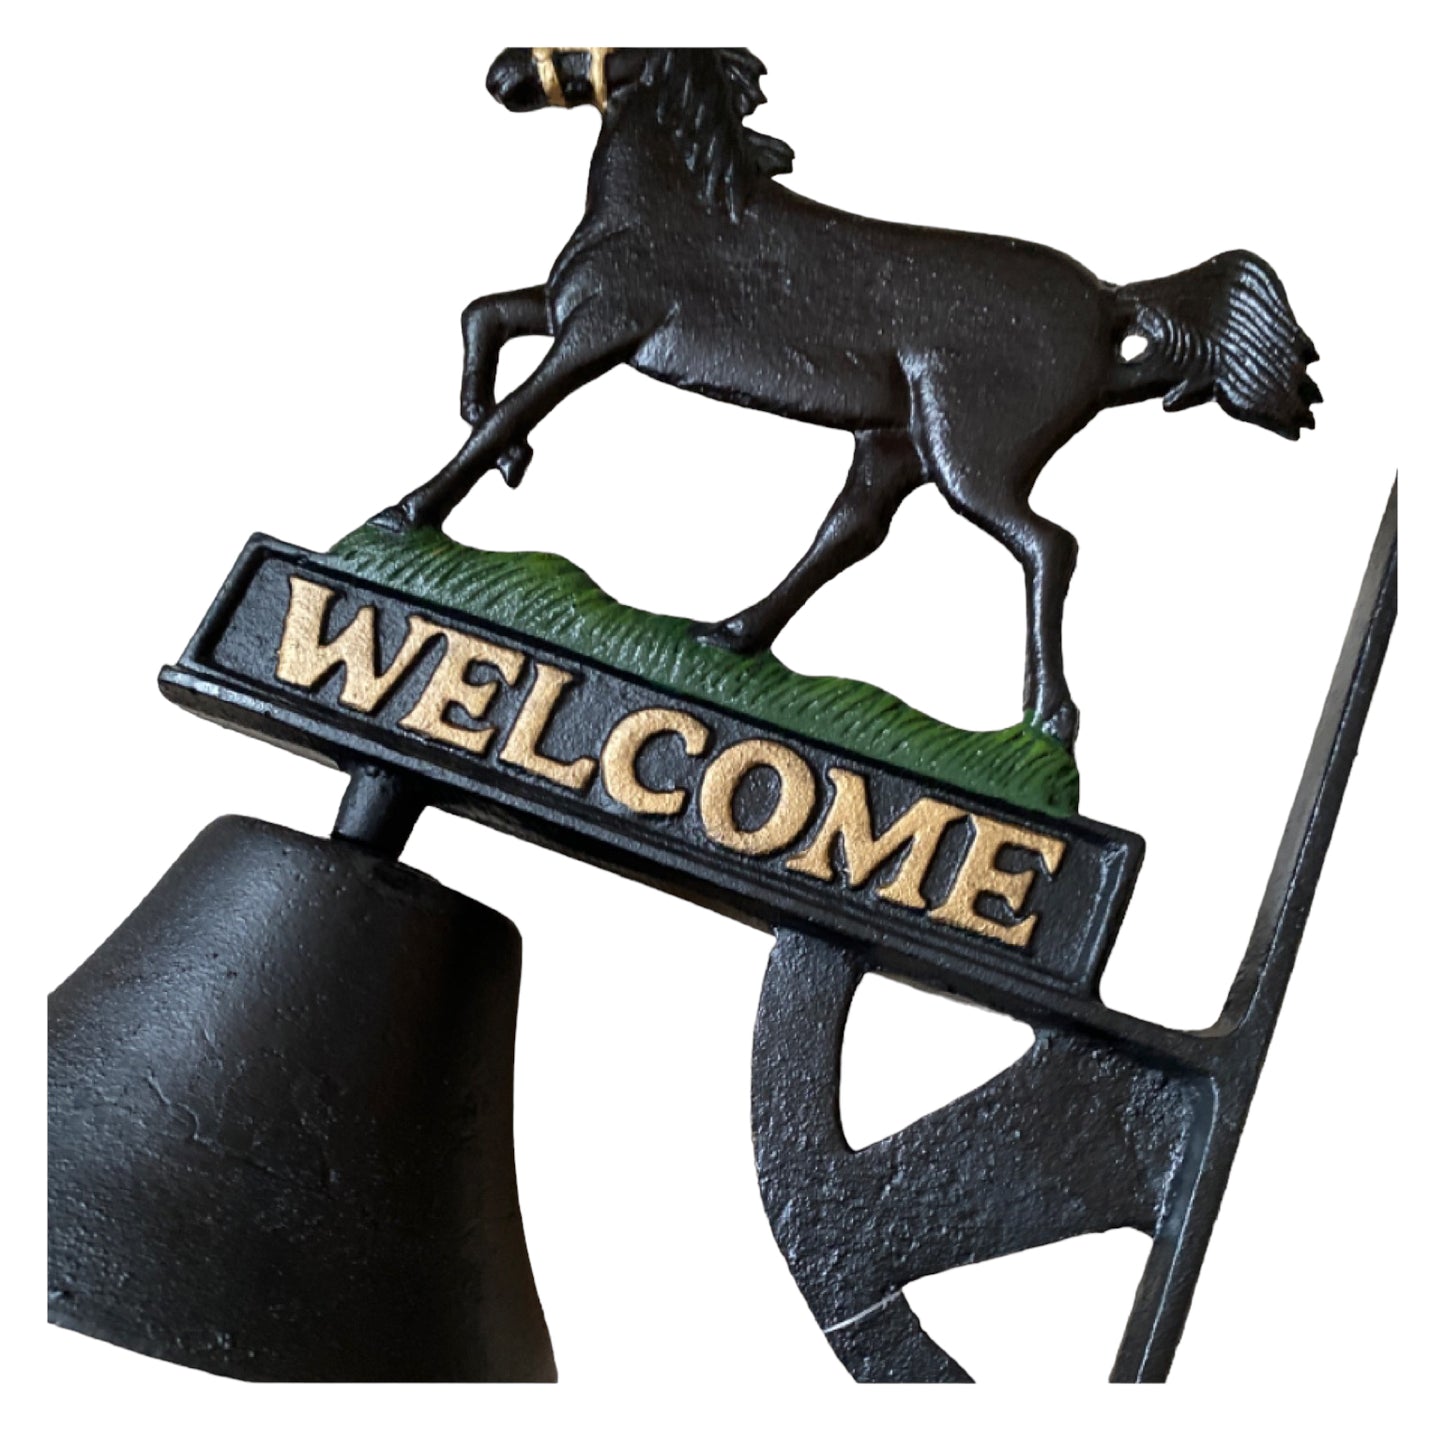 Door Bell Horse Welcome Cast Iron - The Renmy Store Homewares & Gifts 